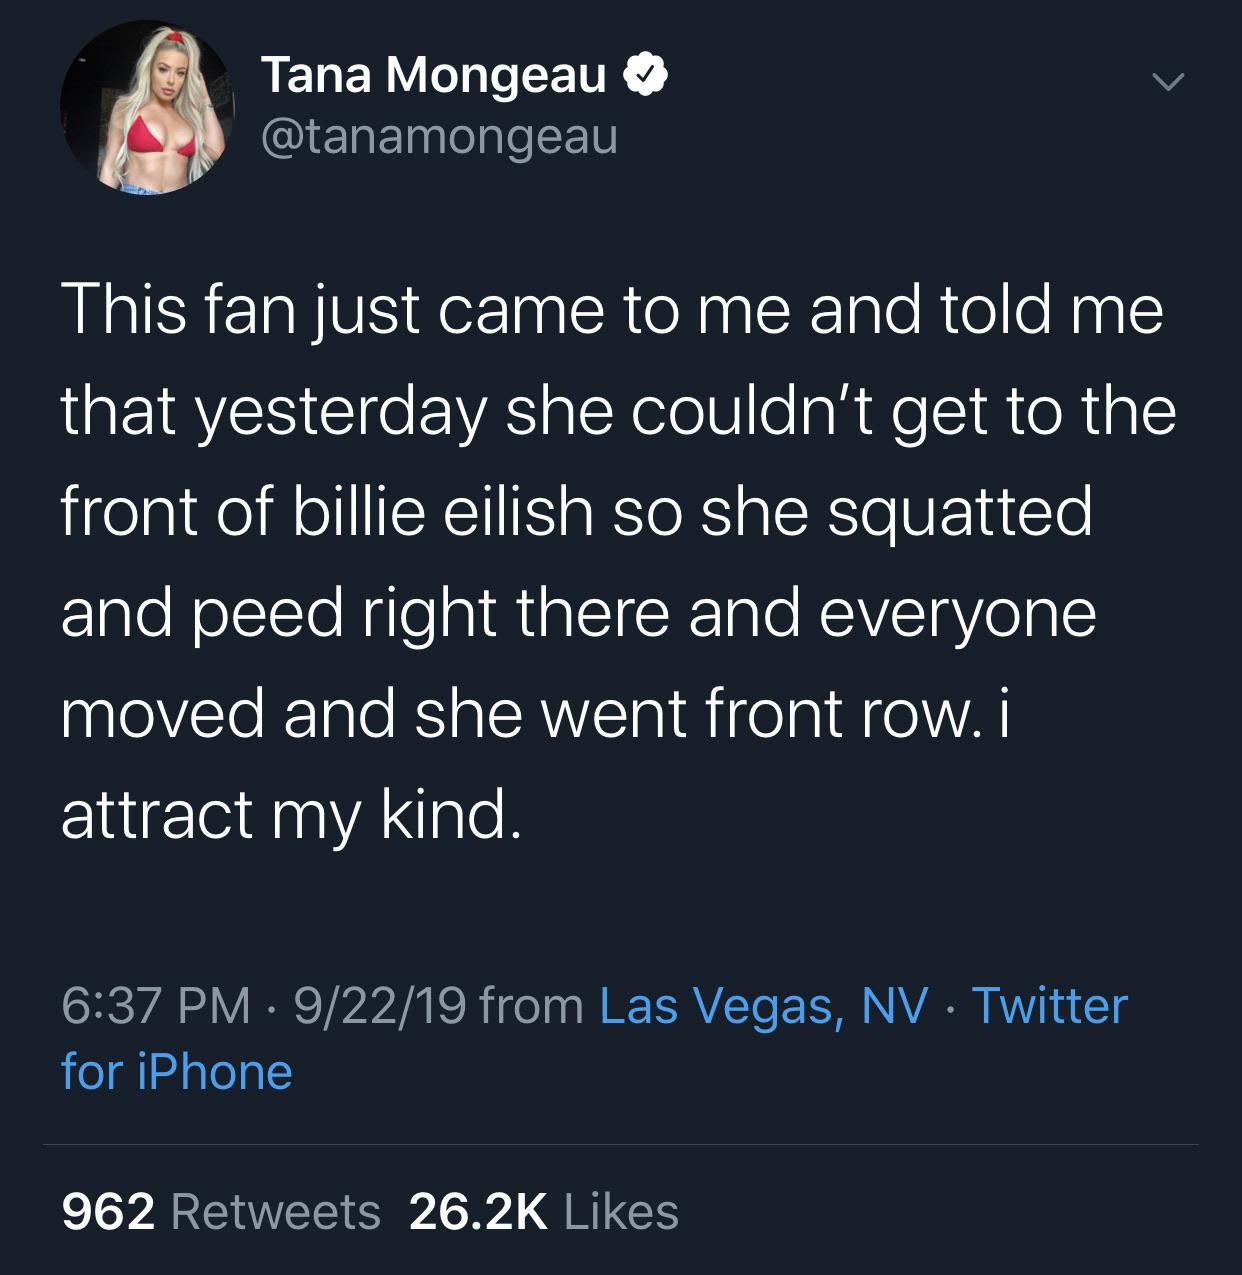 Tana Mongeau This fan just came to me and told me that yesterday she couldn't get to the front of billie eilish so she squatted and peed right there and everyone moved and she went front row. i attract my kind. 92219 from Las Vegas, Nv Twitter for i